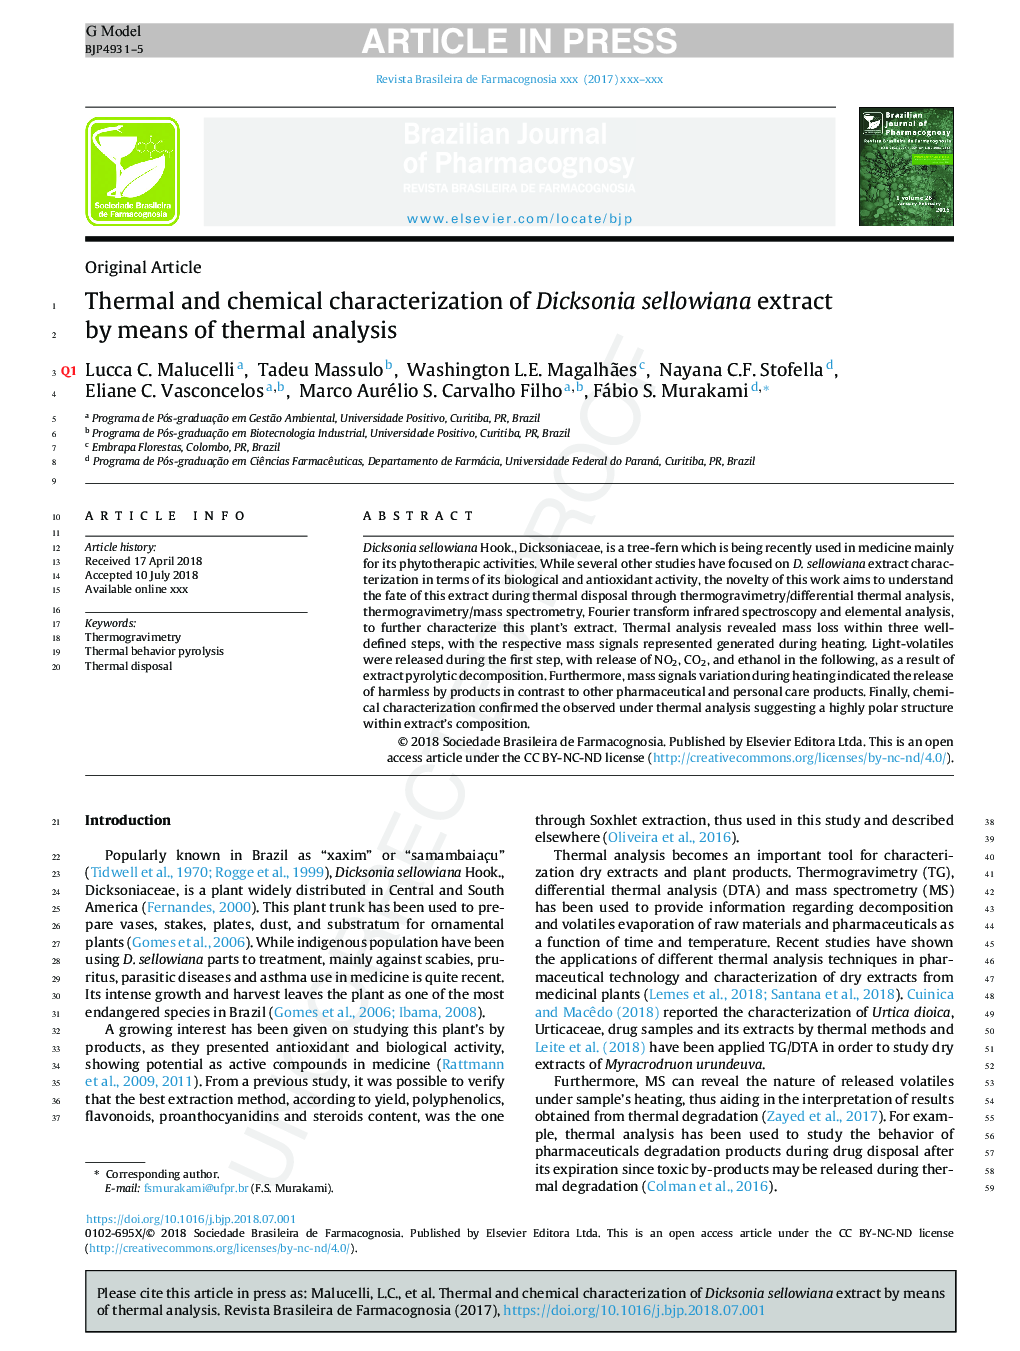 Thermal and chemical characterization of Dicksonia sellowiana extract by means of thermal analysis